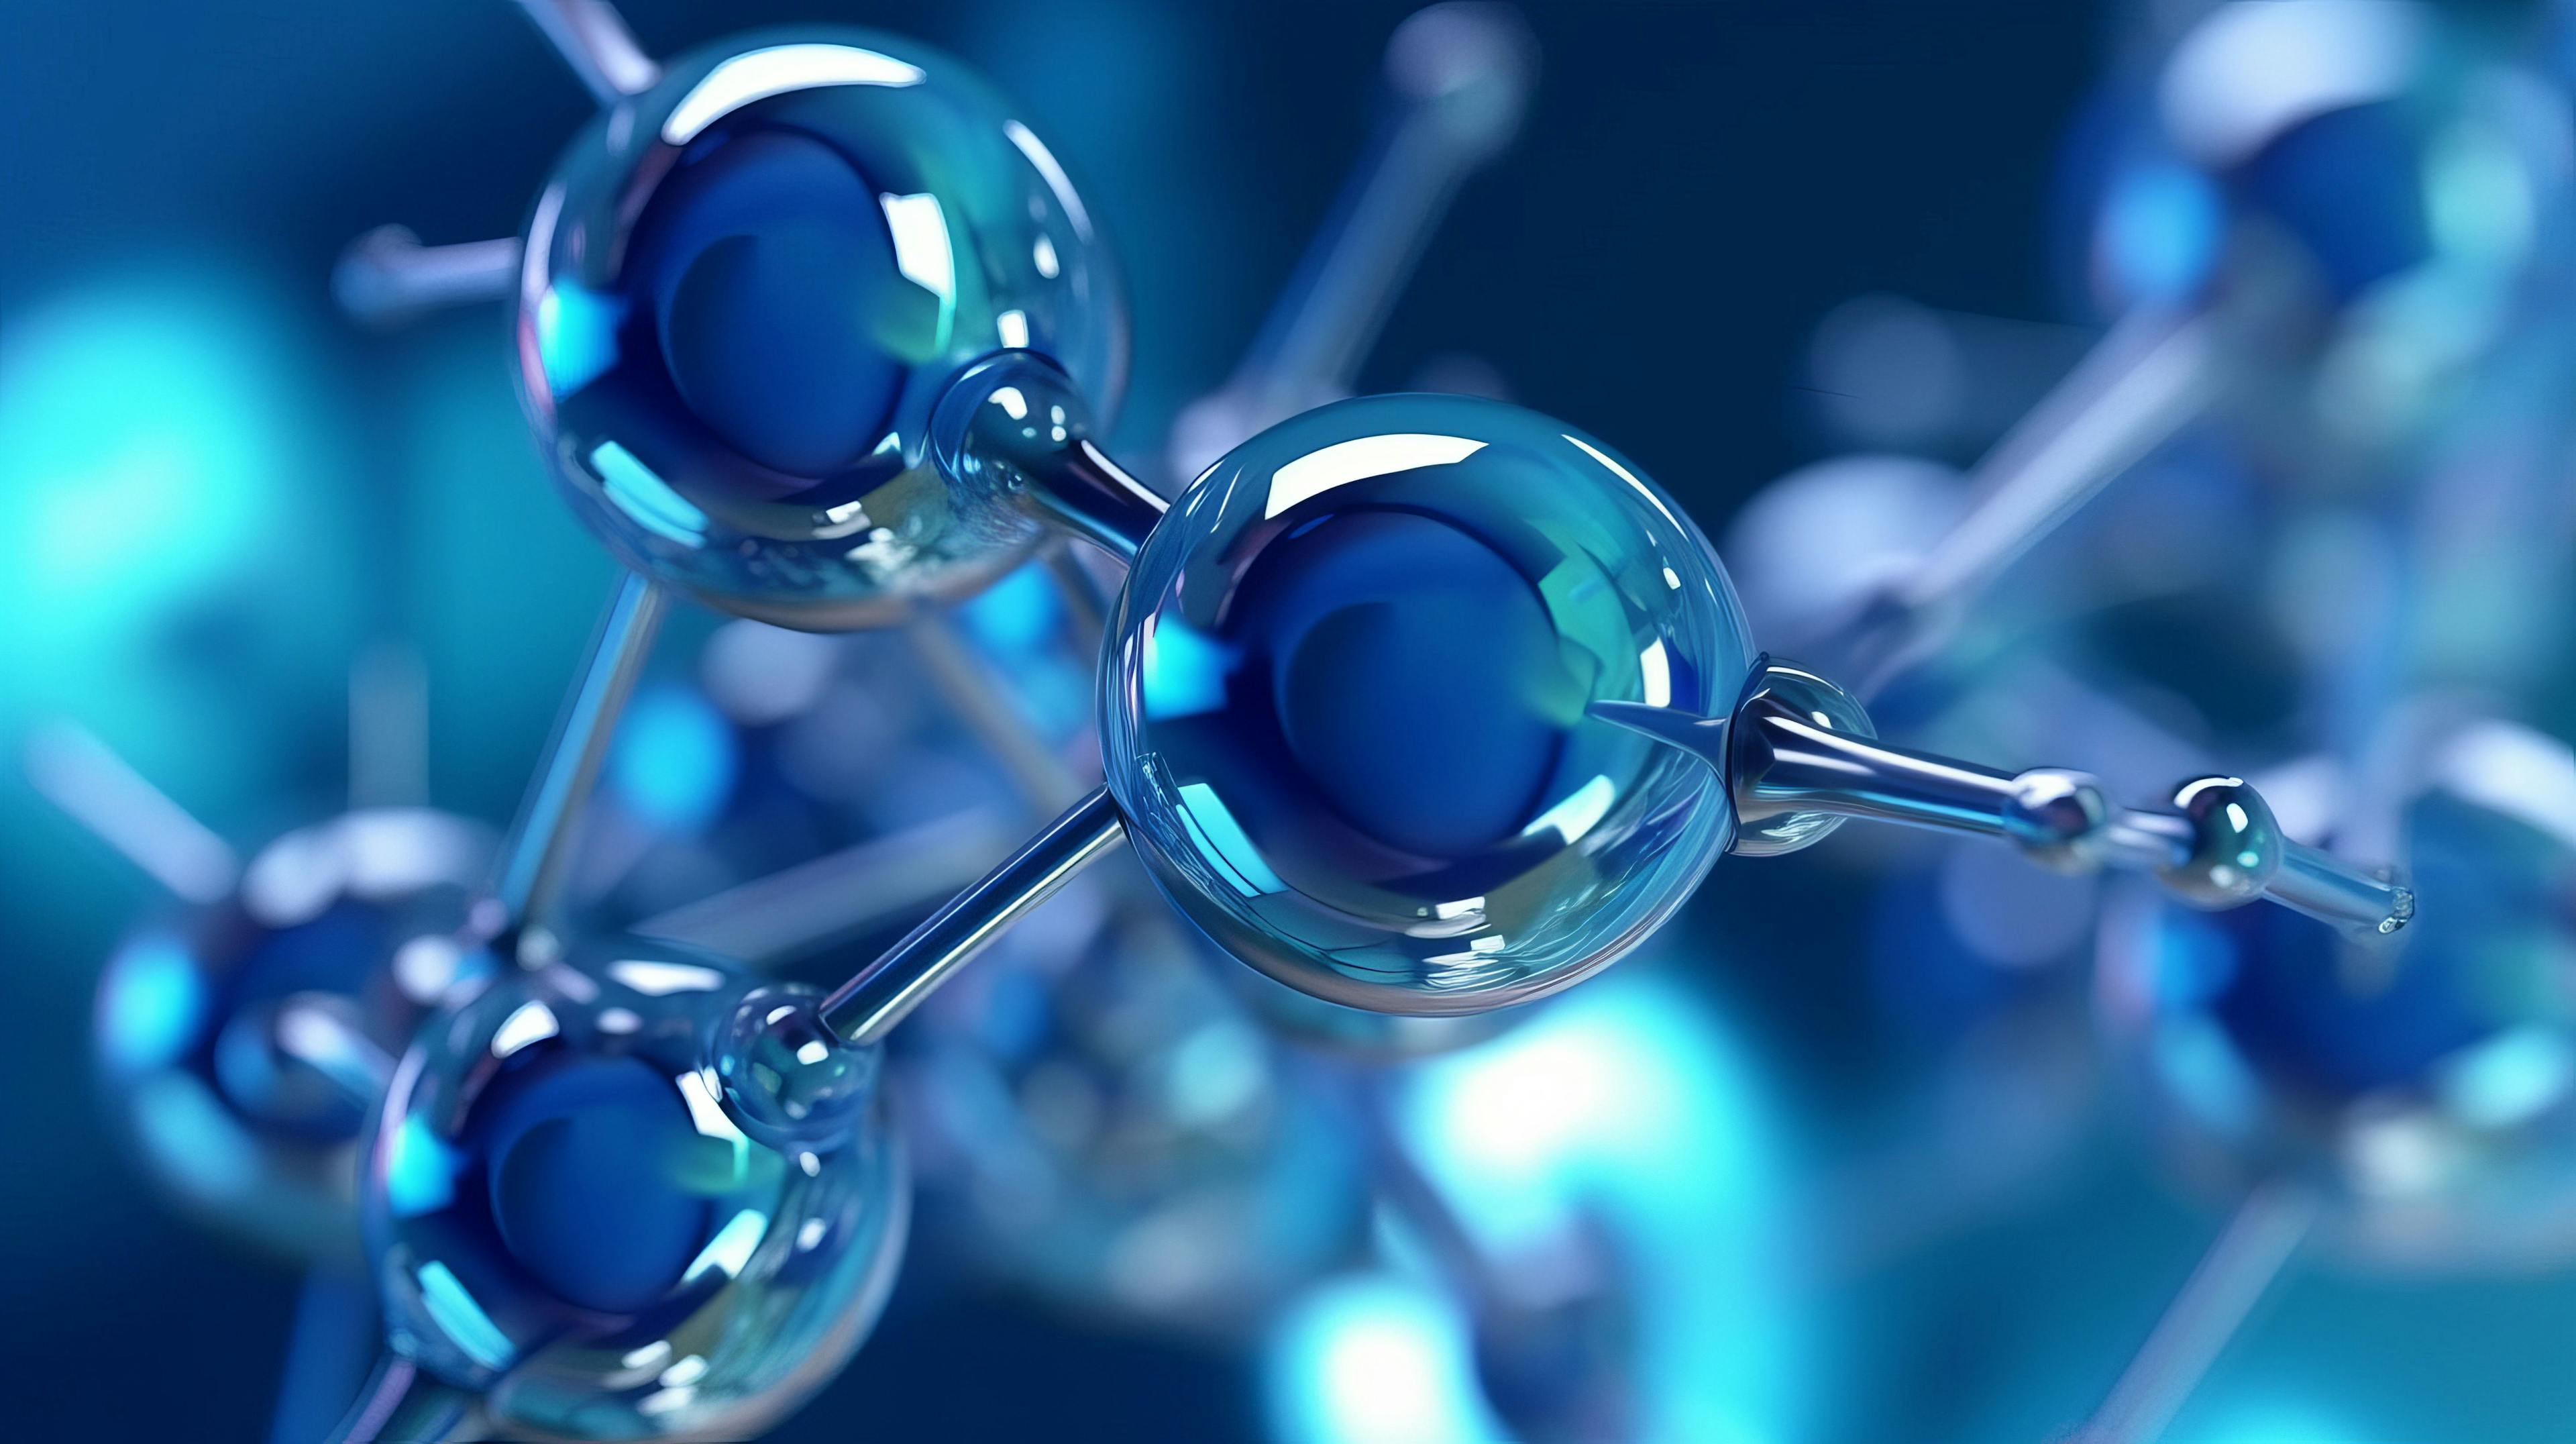 Abstract Hyaluronic acid molecules, blue spherical structure. | Image Credit: © JKLoma - stock.adobe.com.